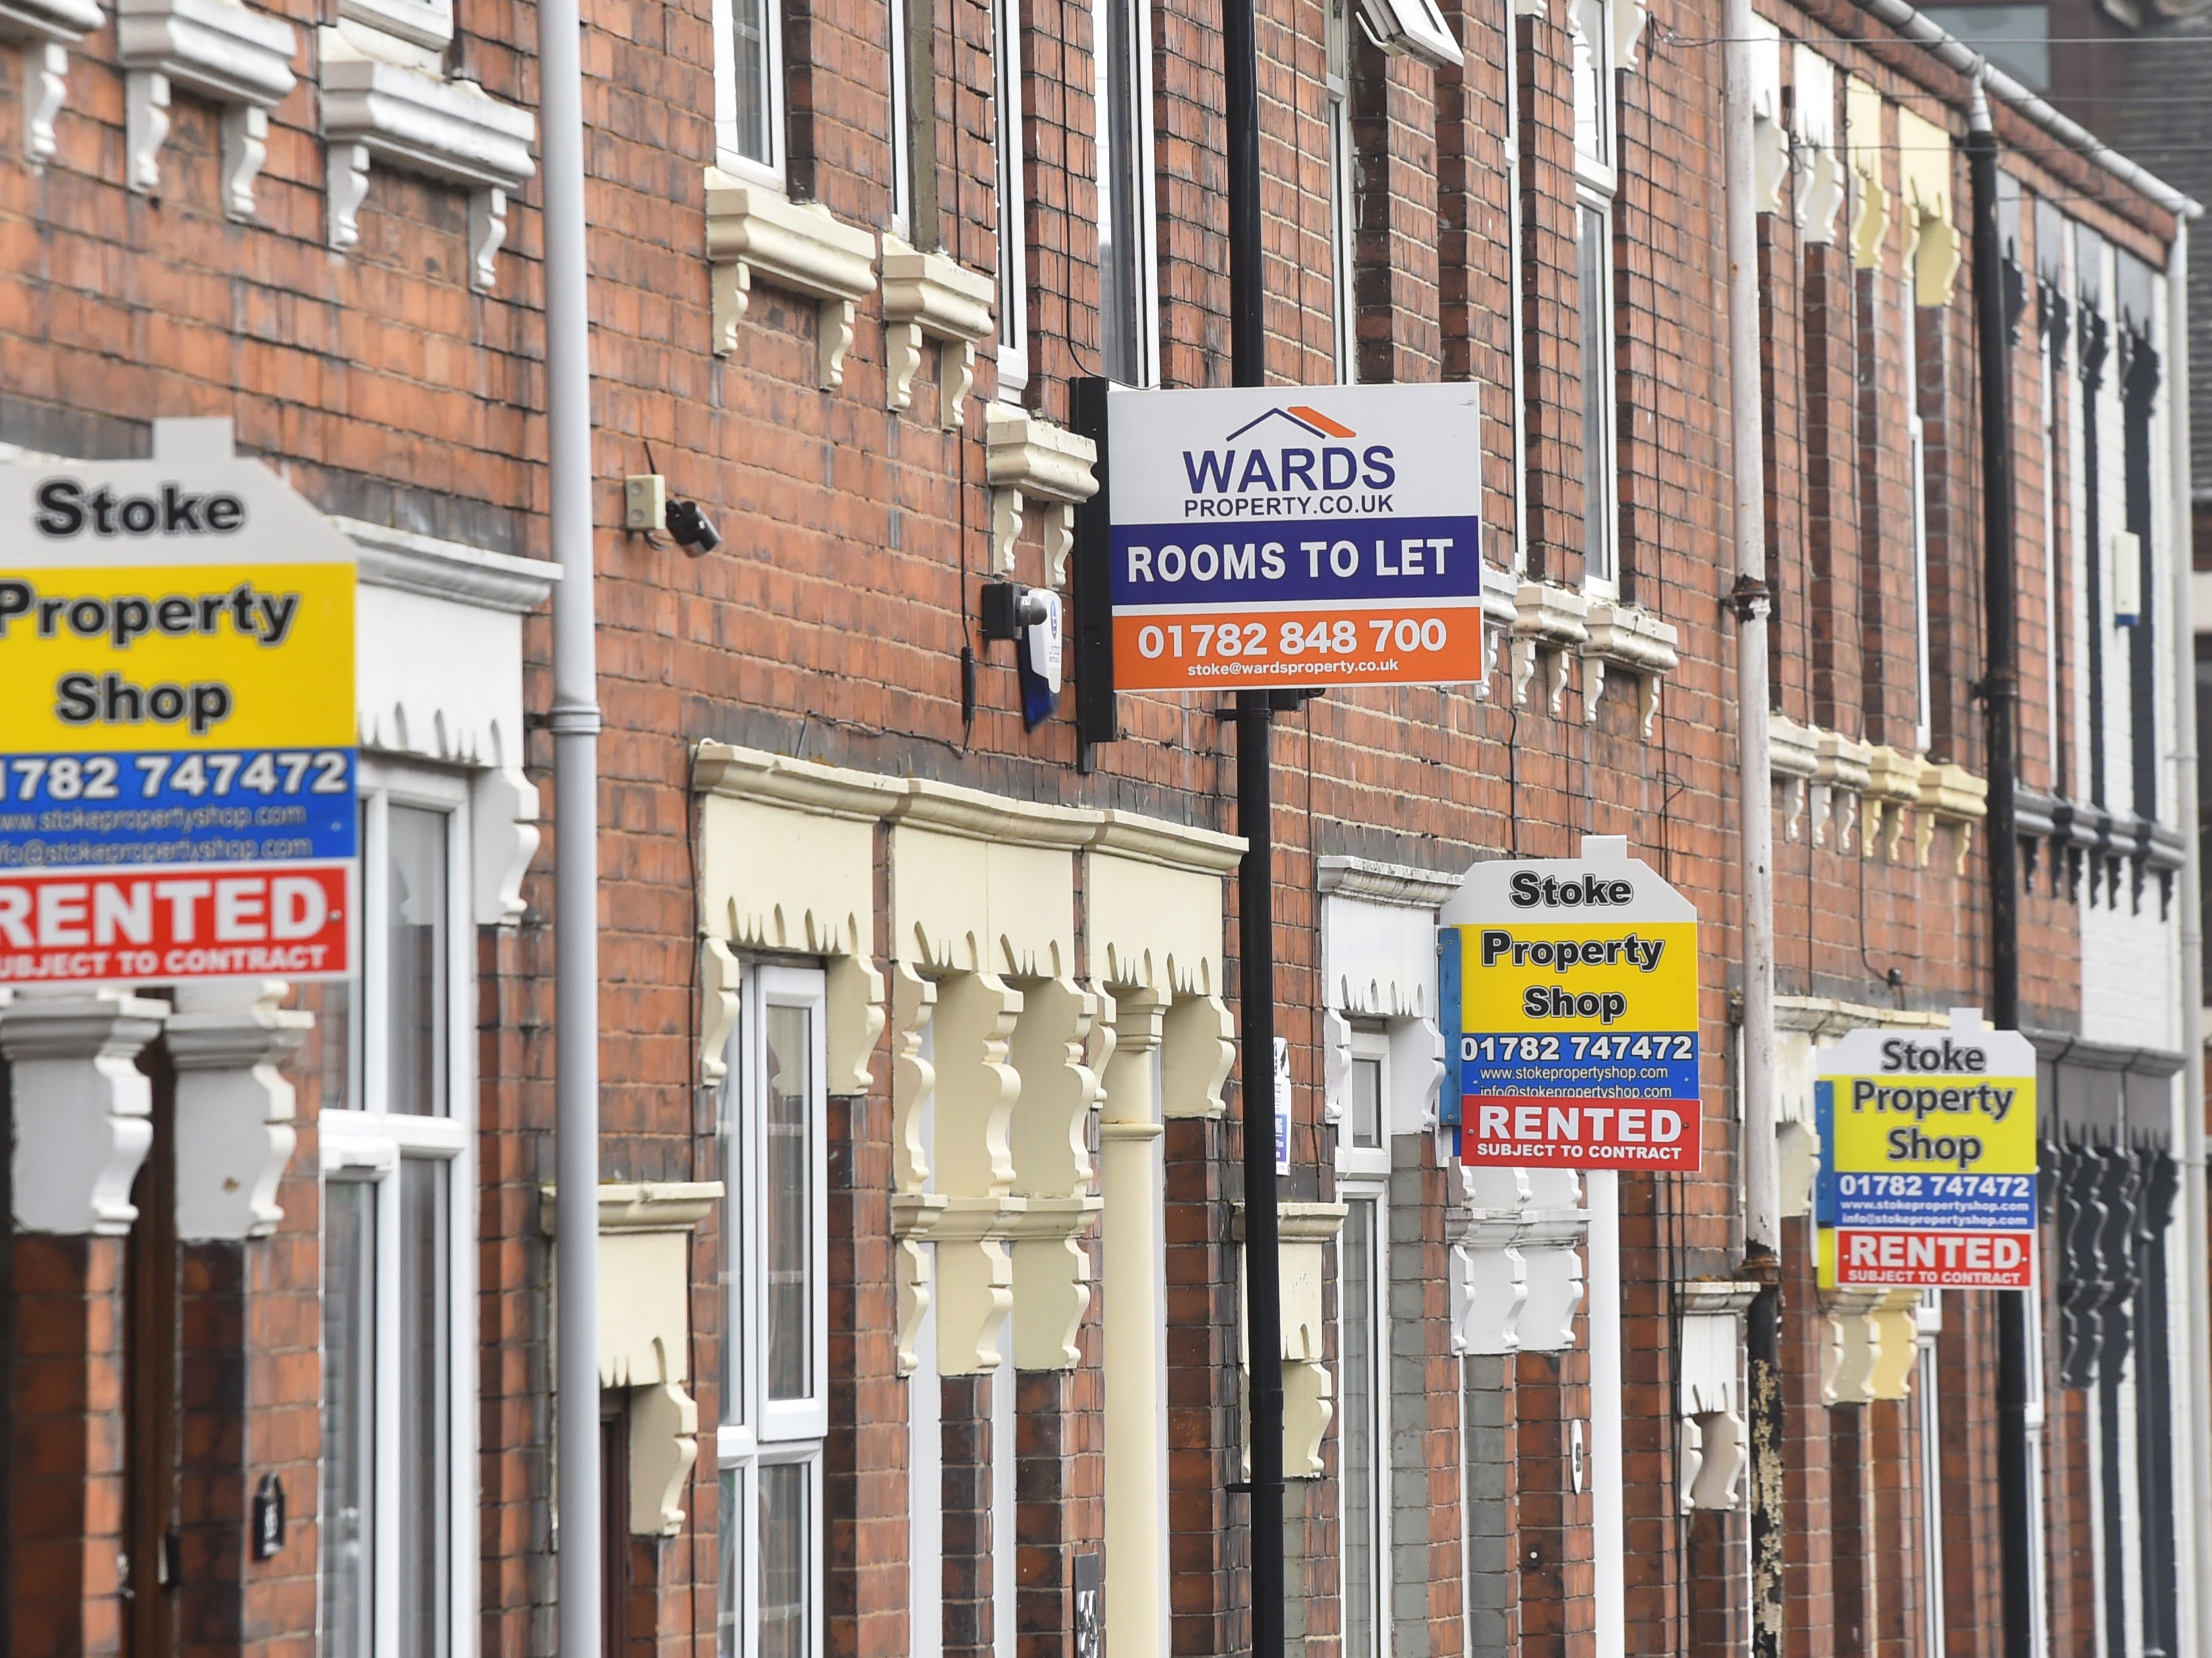 Home repossessions have been banned except in exceptional circumstances until April 1